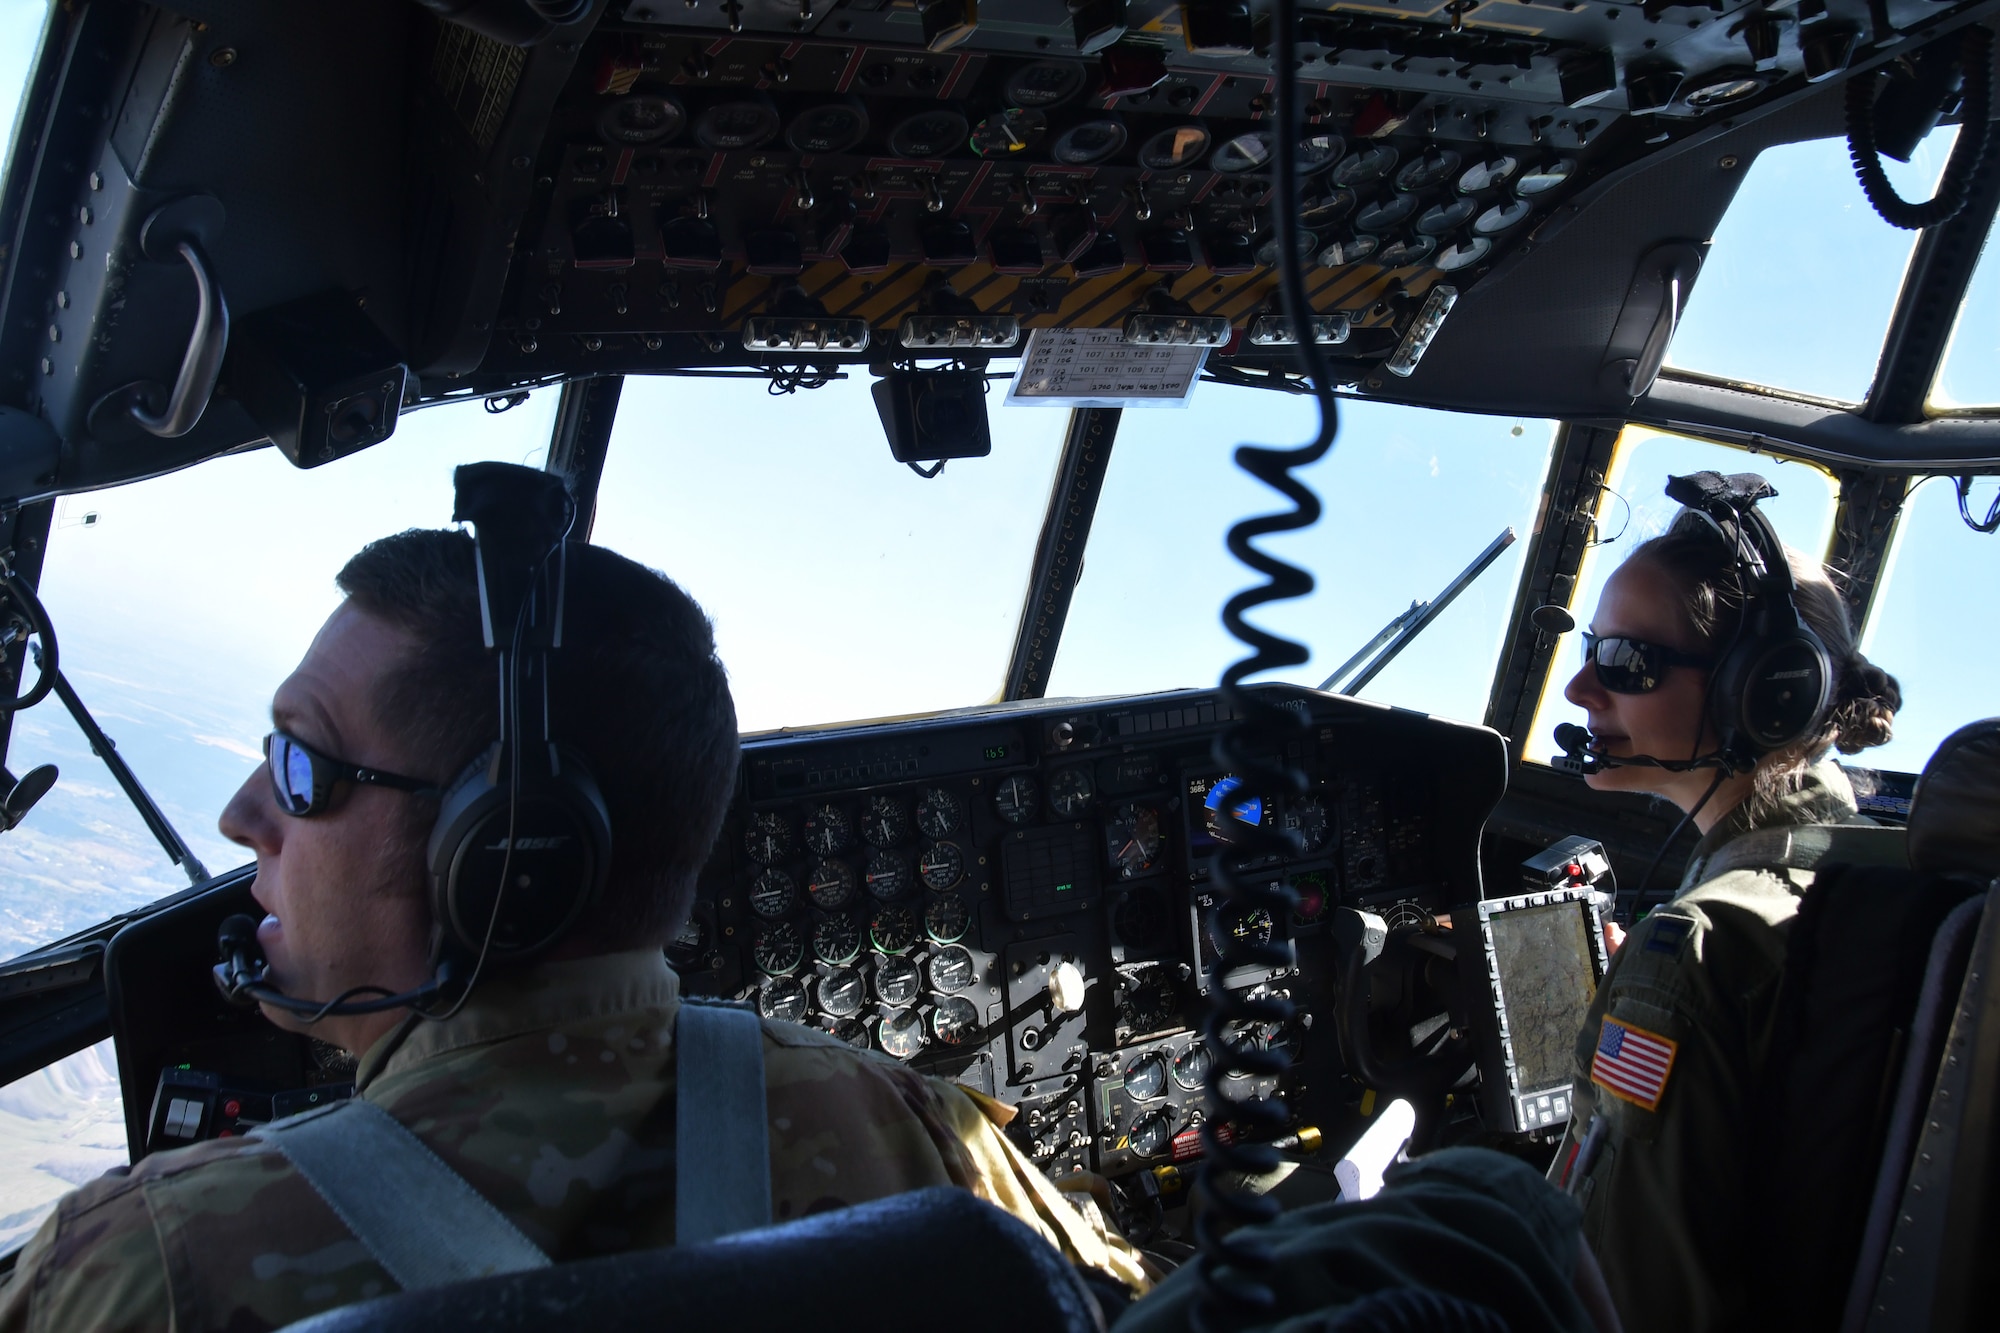 Maj. Andrew F. Smith and Capt. Latessa R. Meader, both 700th Airlift Squadron pilots, fly over Rome, Ga. March 4, 2021. Multiple C-130s flew together as part of Baltic Wolf 2021, a large formation exercise incorporating other units within the Air Force Reserve Command. (U.S. Air Force photo by Senior Airman Kendra A. Ransum)